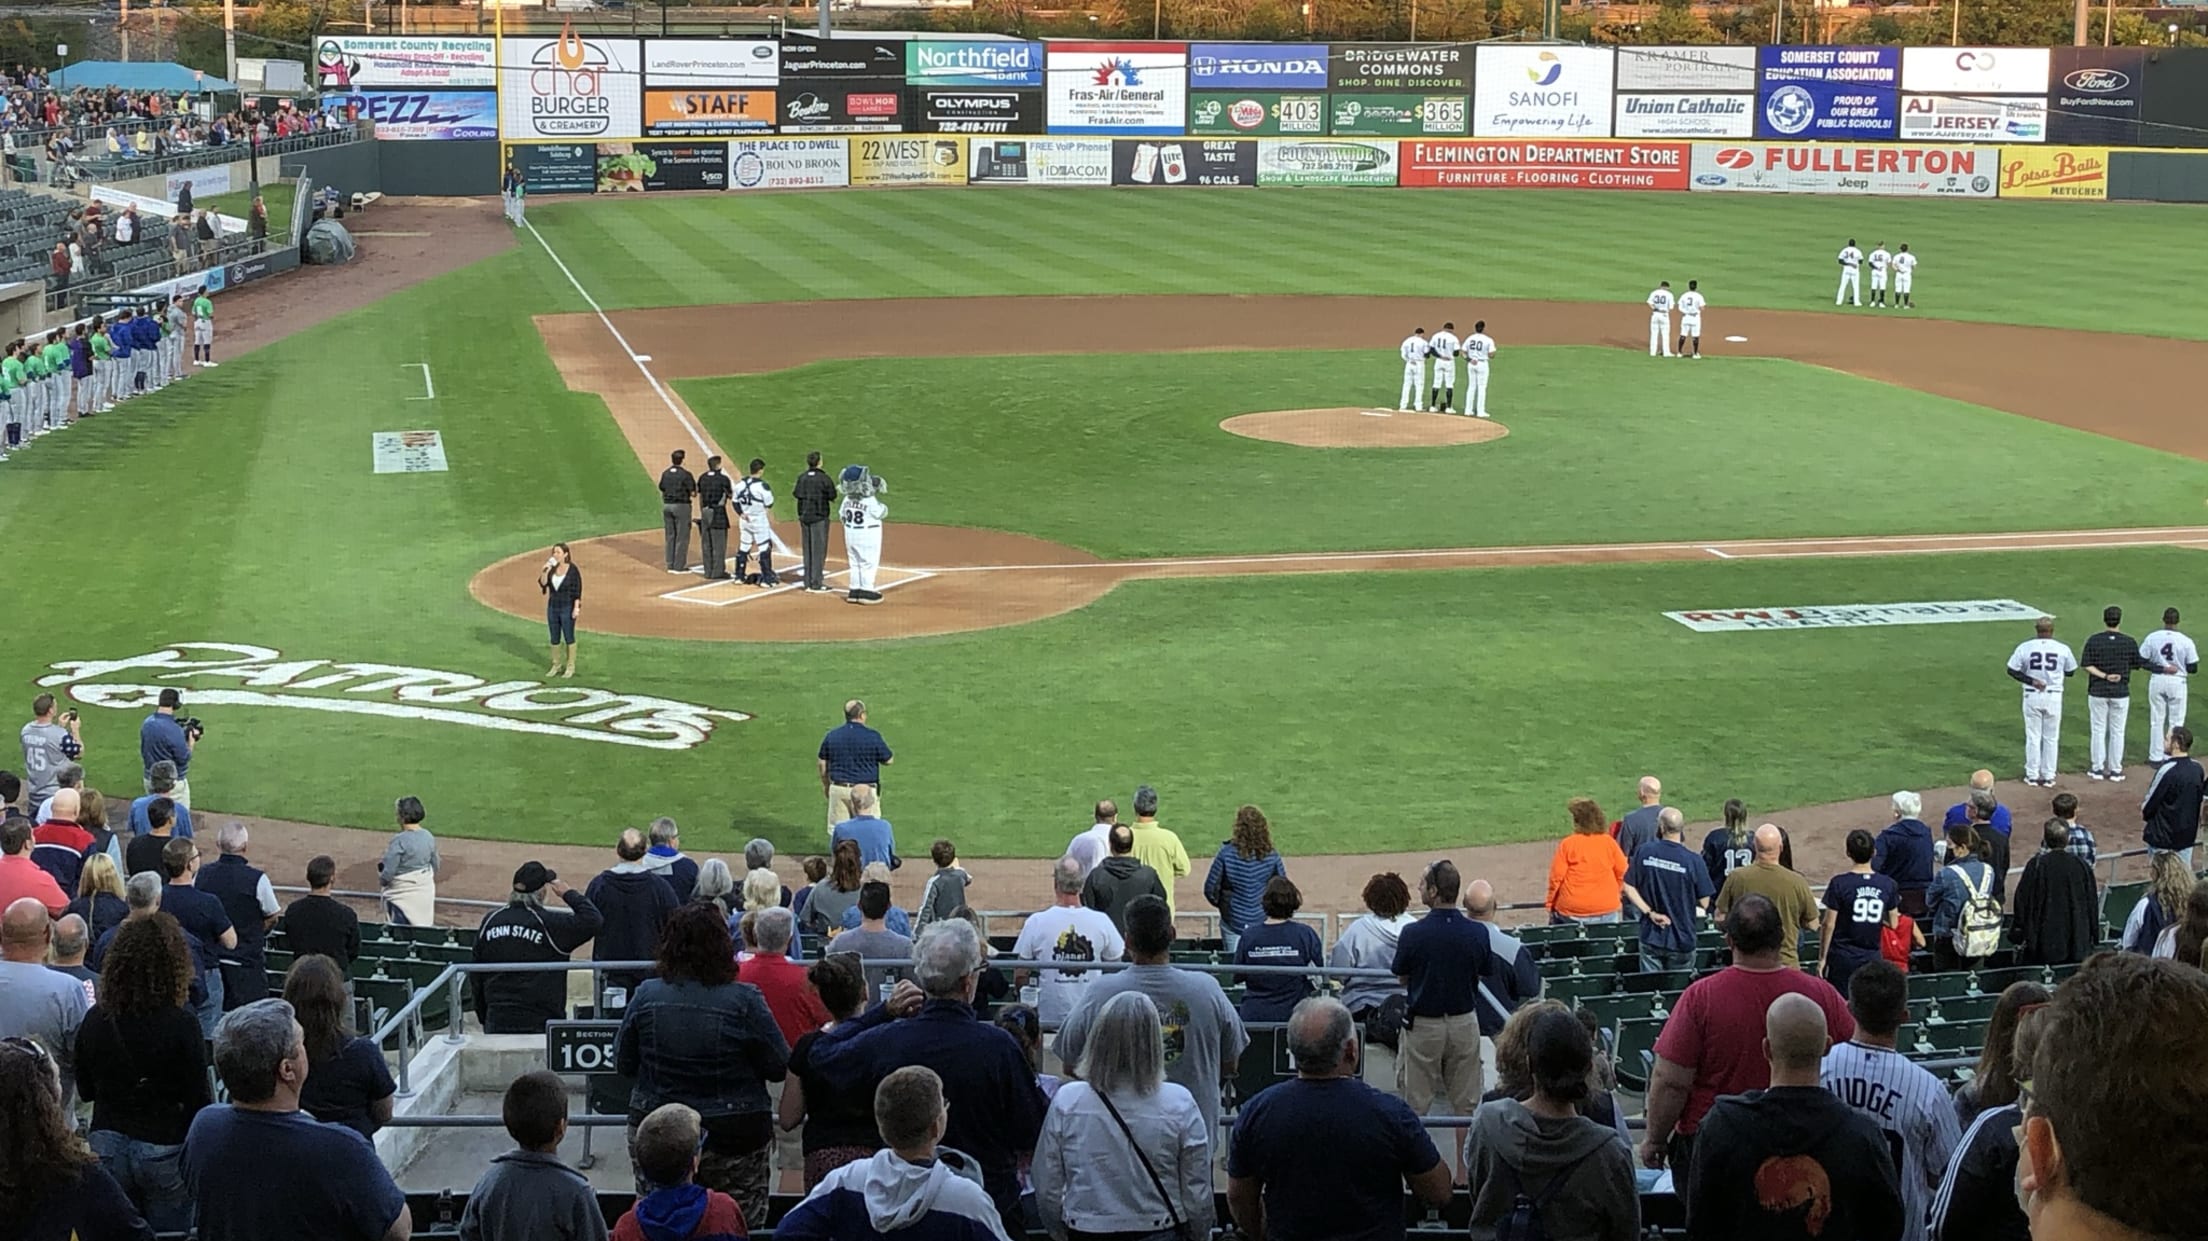 Former Yankees great Sparky Lyle is Somerset Patriots manager emeritus